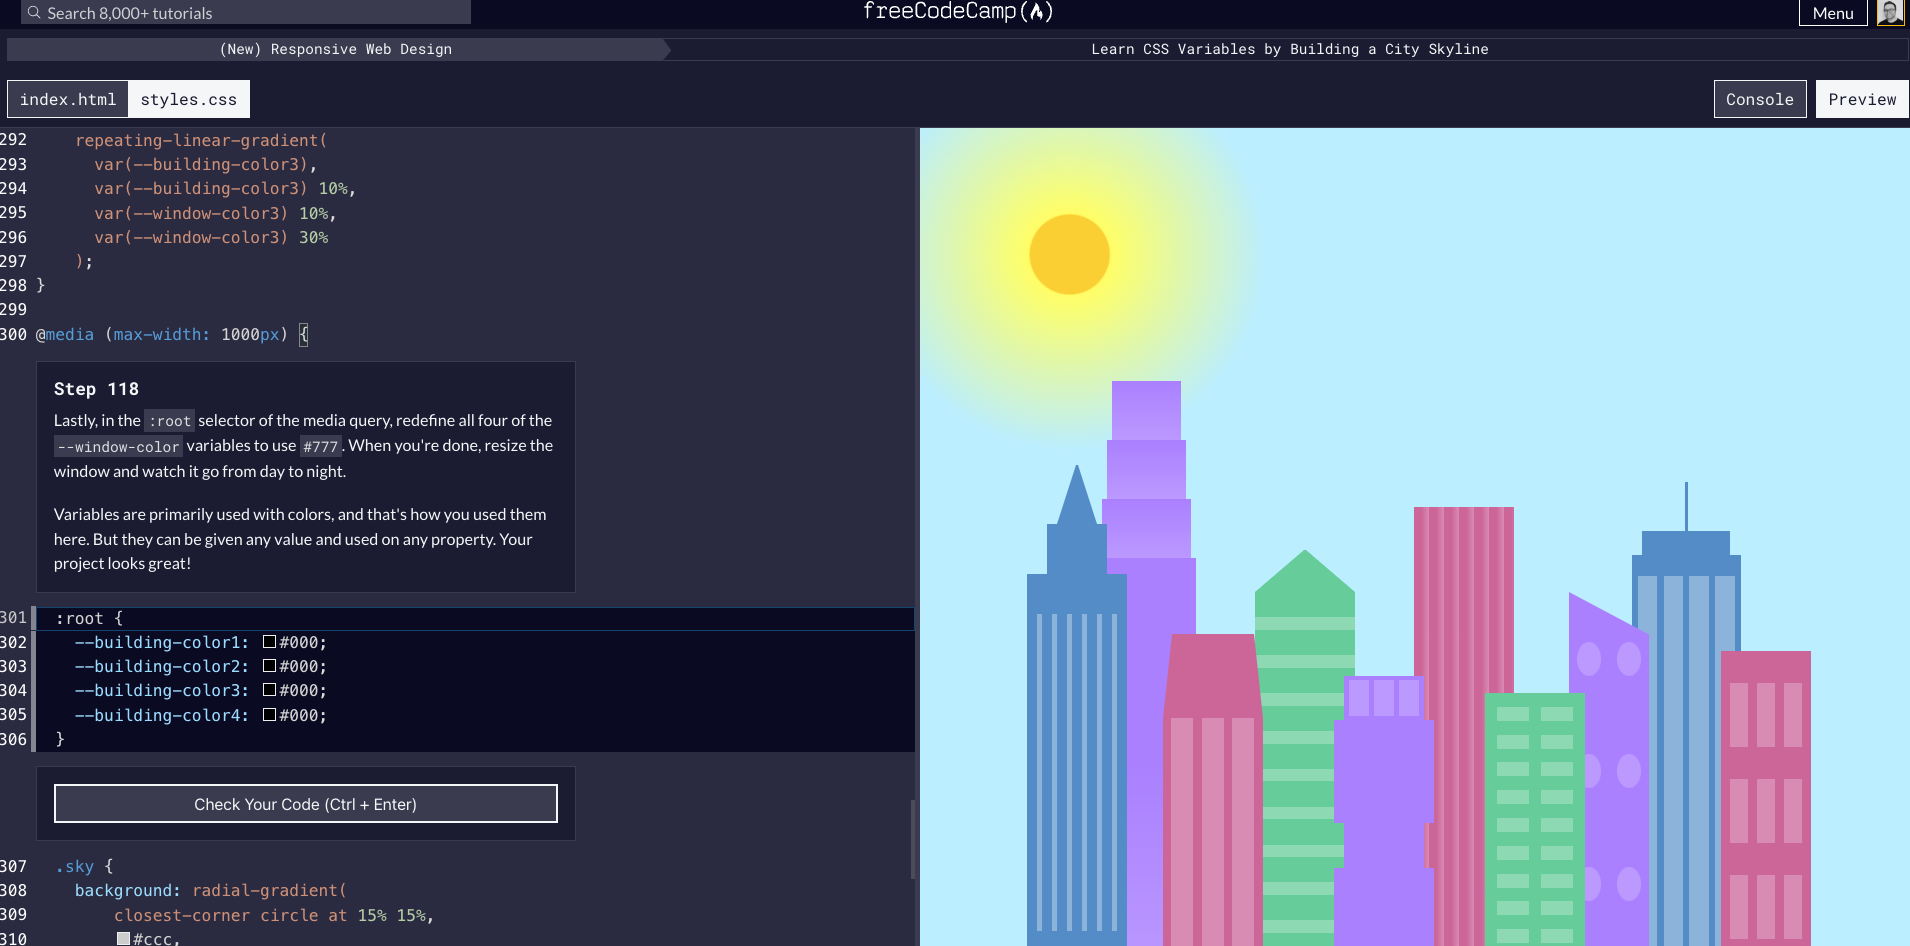 Learn_CSS_Variables_by_Building_a_City_Skyline__Step_118___freeCodeCamp_org_----1-